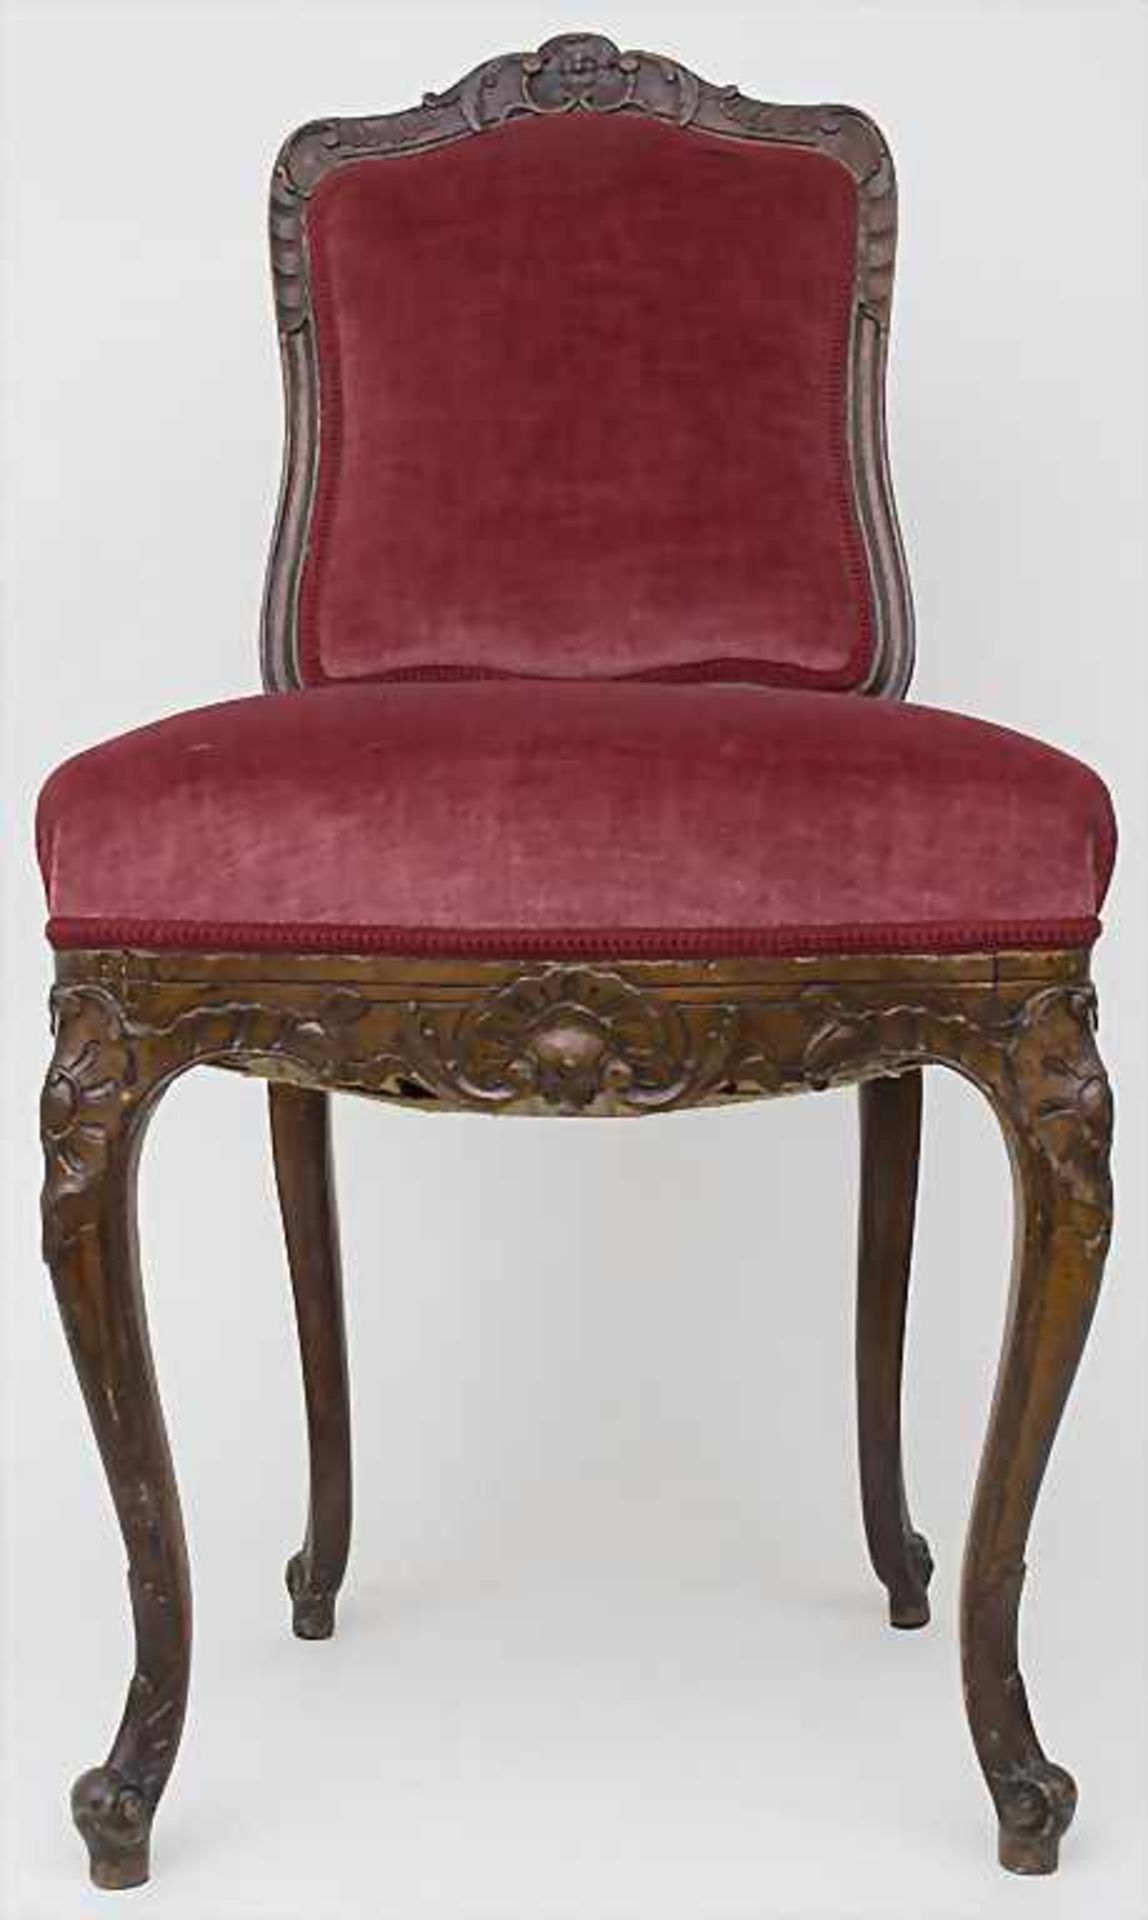 Rokoko--Stuhl mit Rocaillendekor / A Rococo chair with rocailles